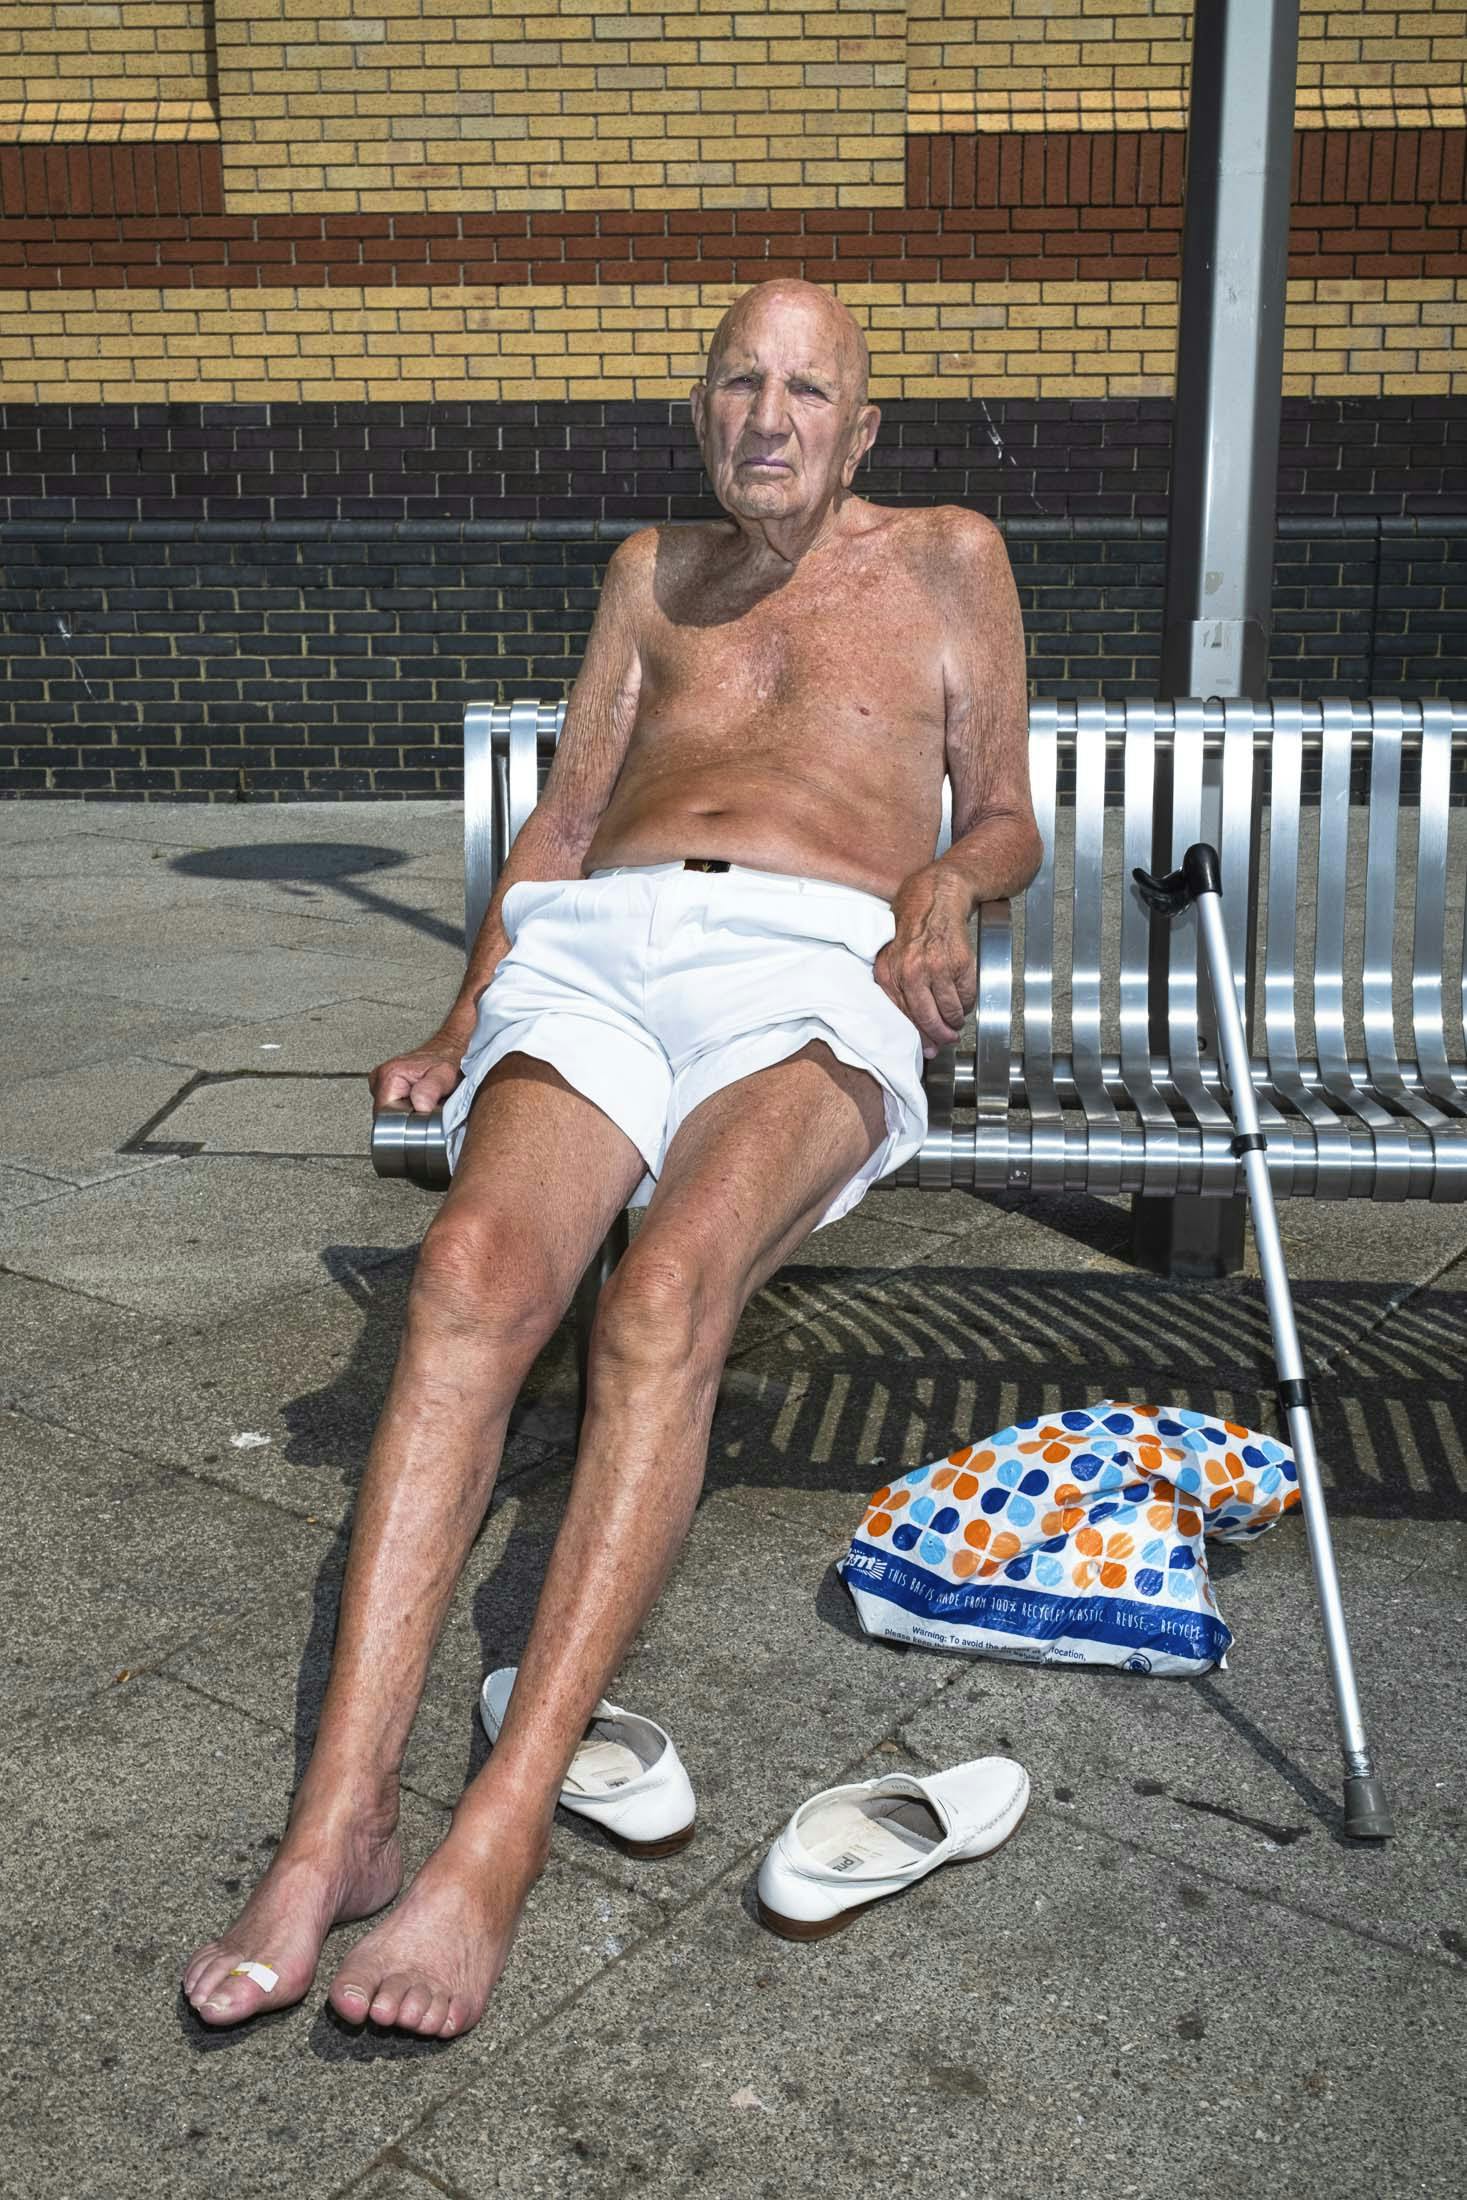 Shirtless old man in white shorts sun bathing on bench in Southend England